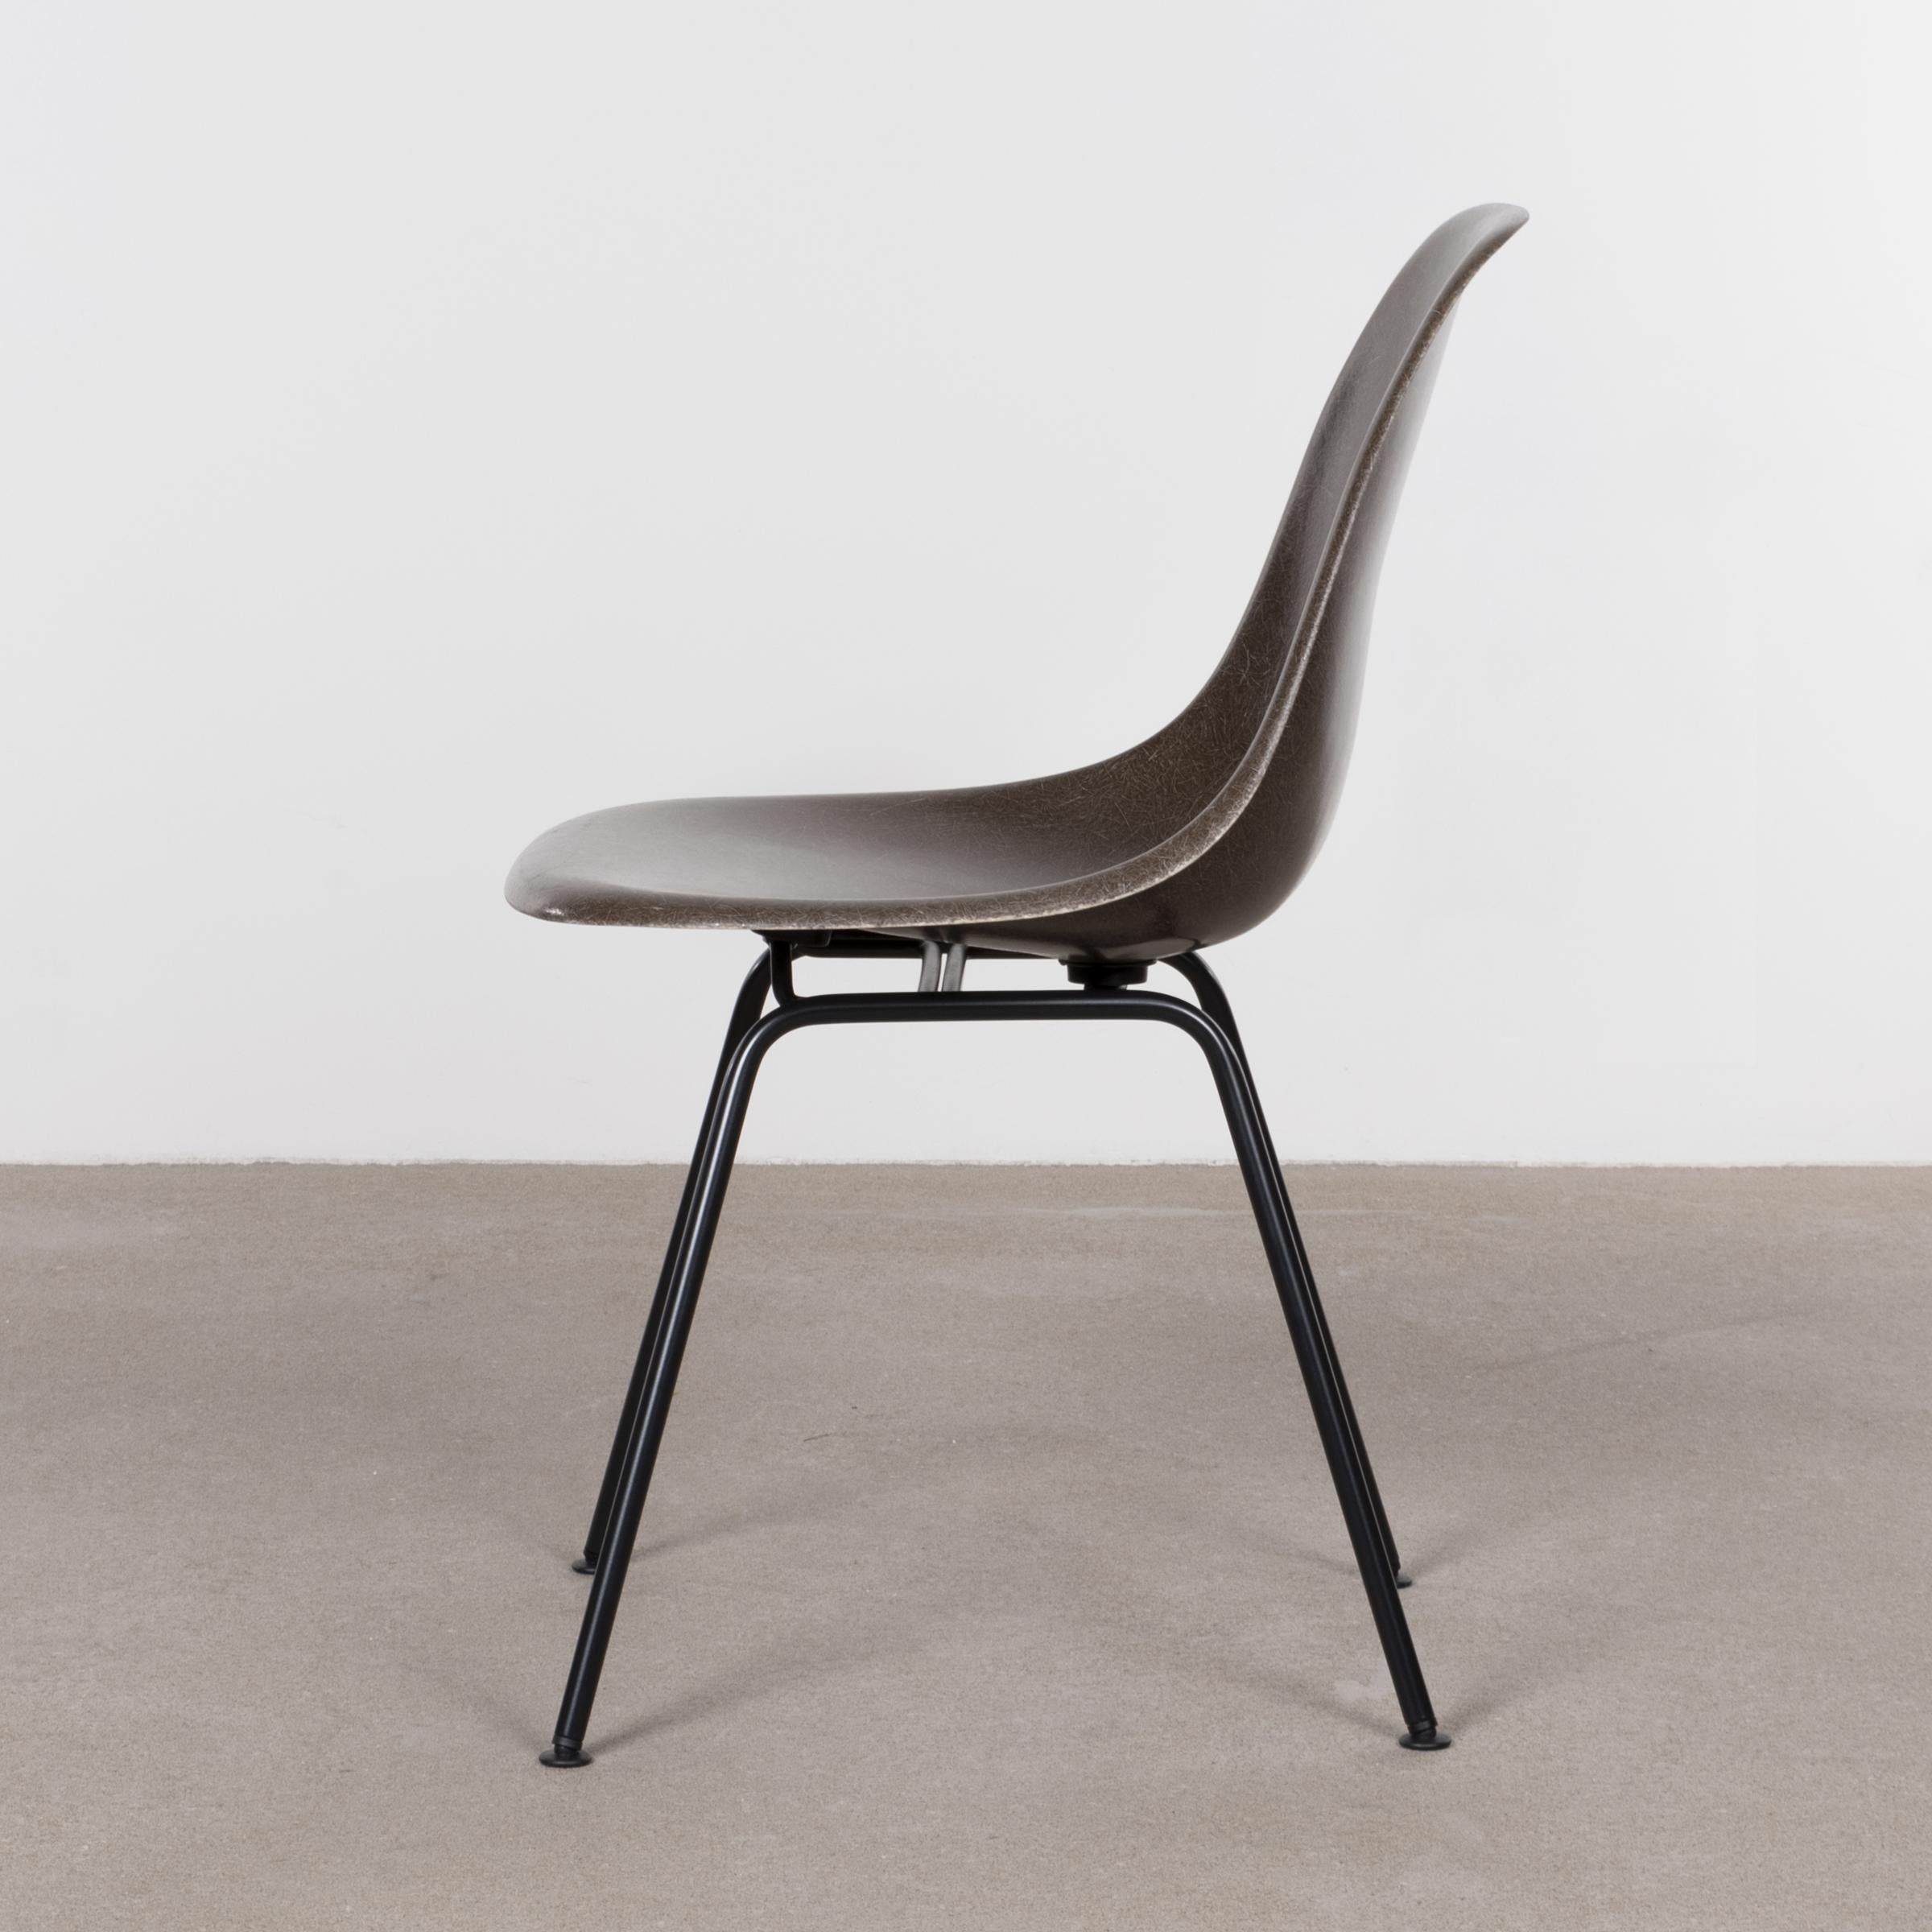 Beautiful iconic DSX chair in the color: Seal brown. The side shell chair is in very good condition with only slight traces of use. Replaced shock mounts which guarantee save usability for the next decades. Basic dark powder coated or zinc plated